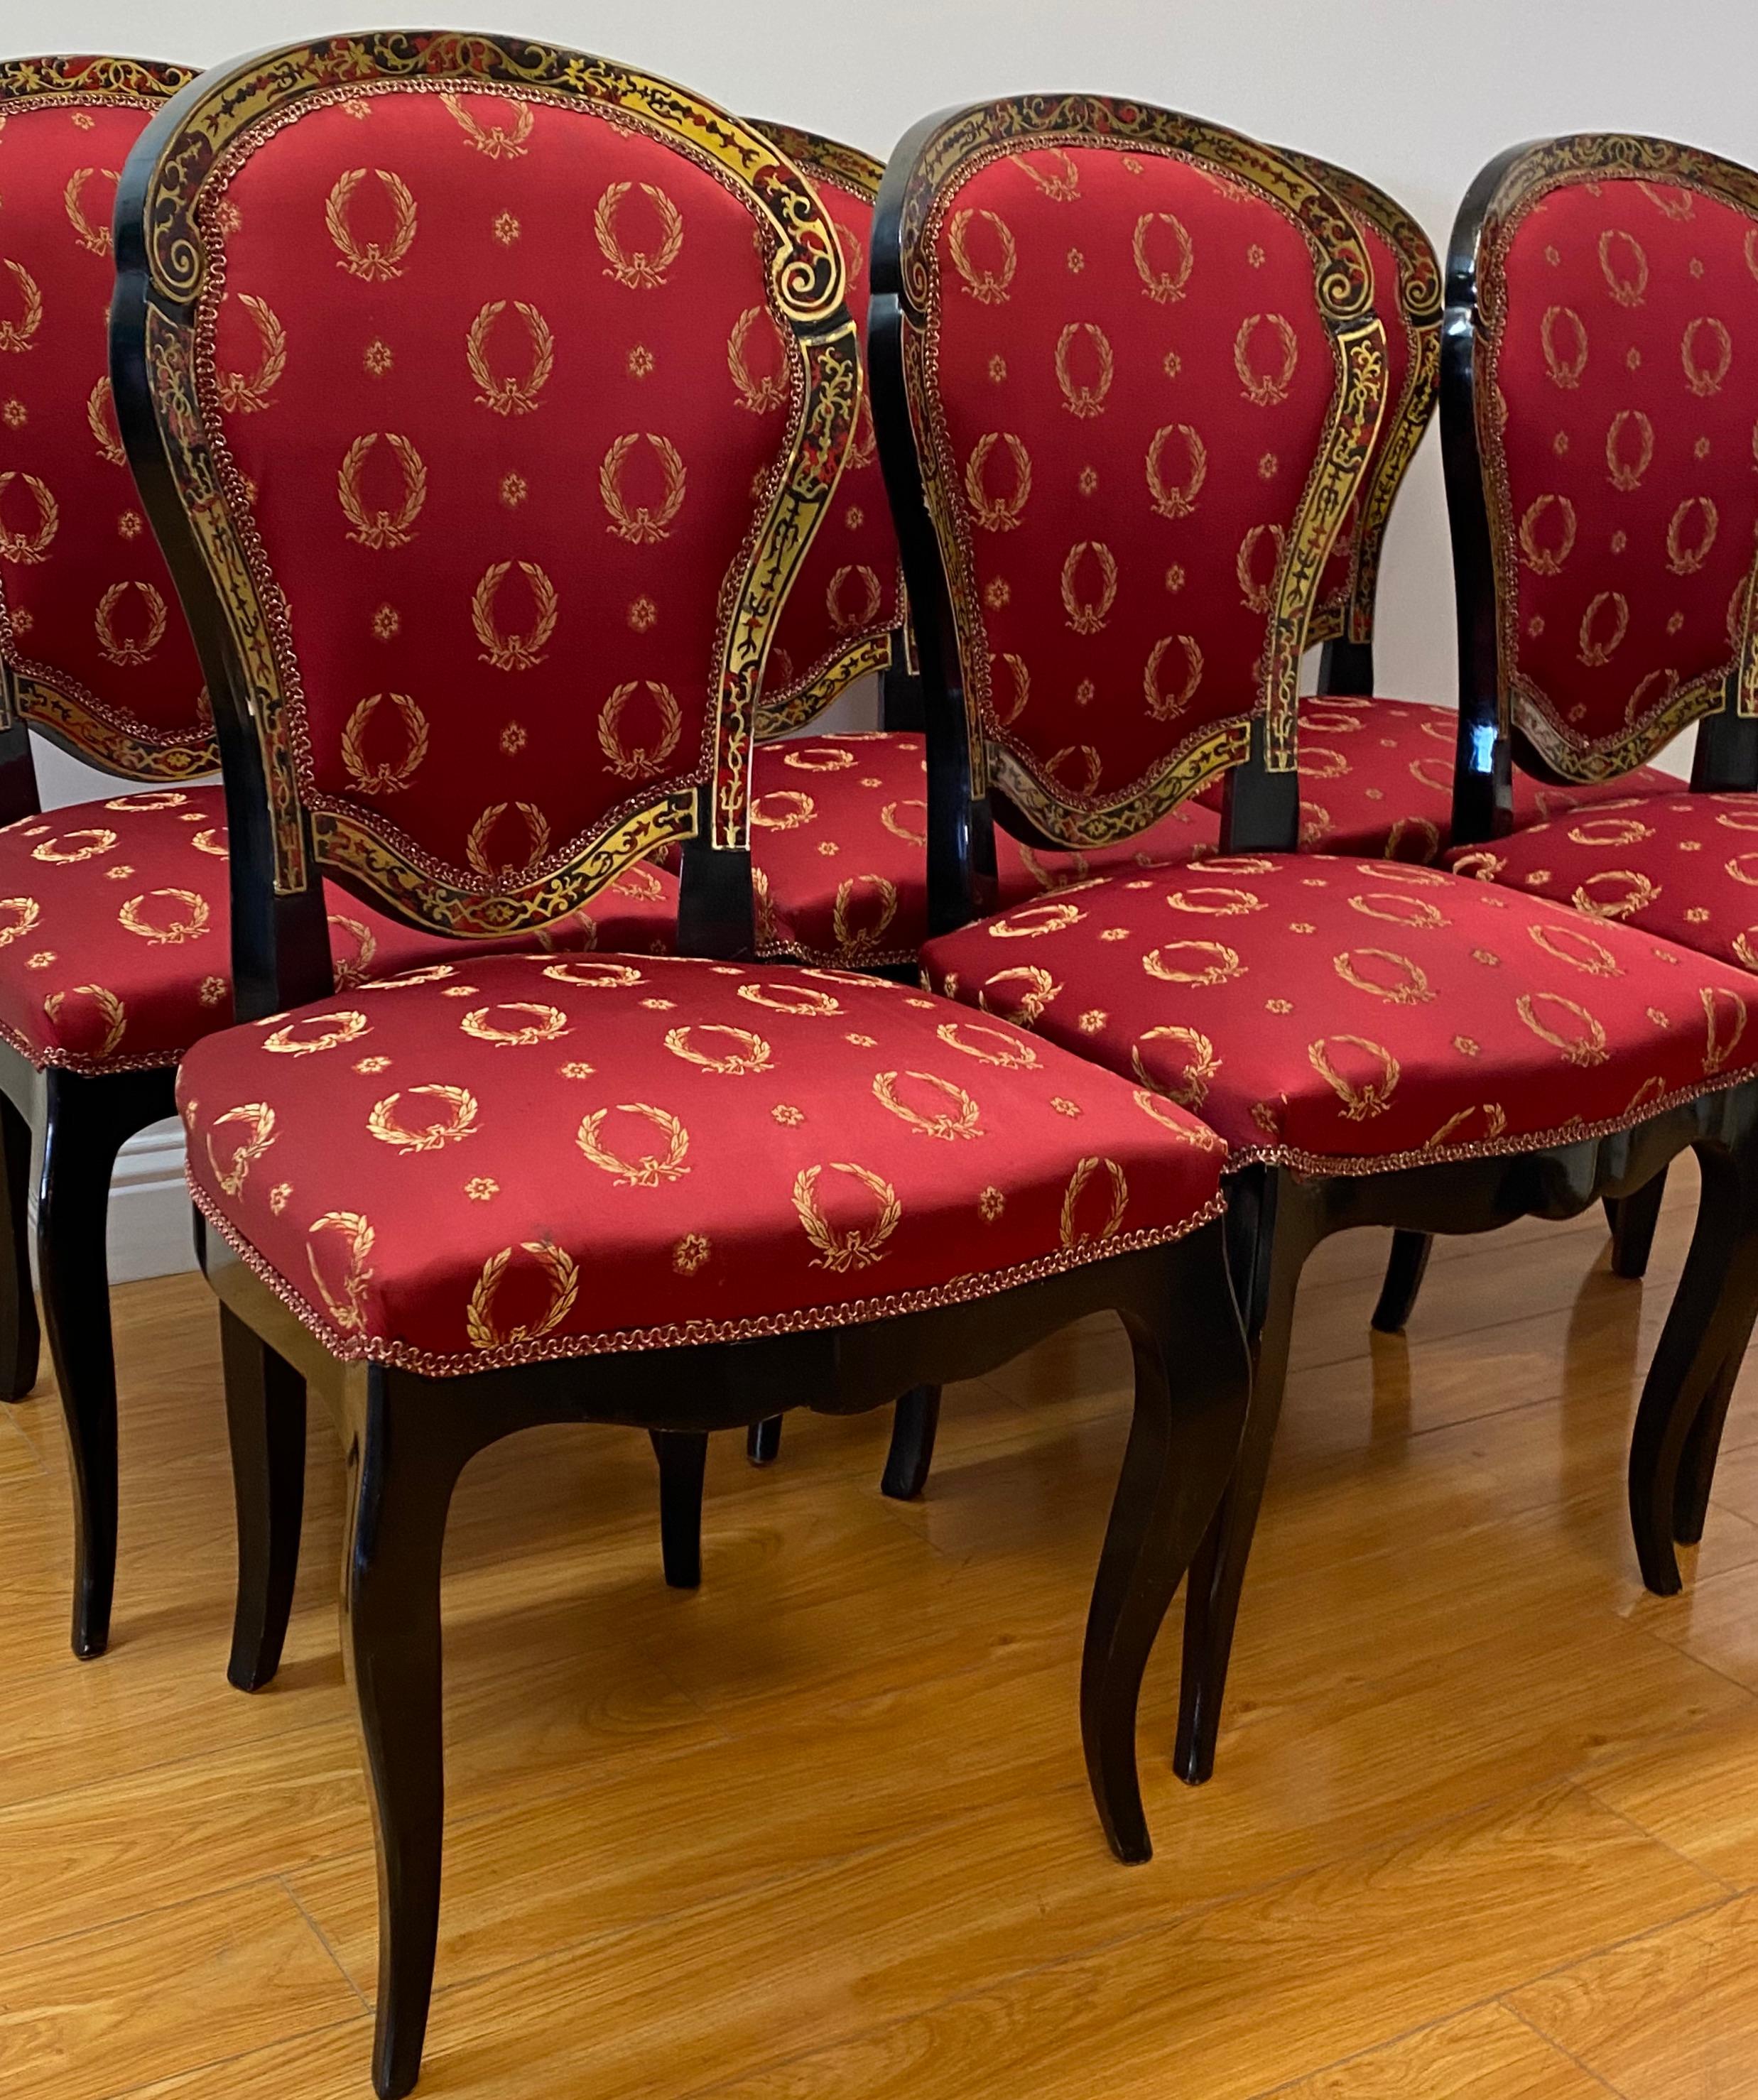 Set of six early 20th century Louis XV Style Faux Boulle inlaid dining chairs

Gorgeous ebonized frames with faux boulle and brass inlay

Each chair measures 21